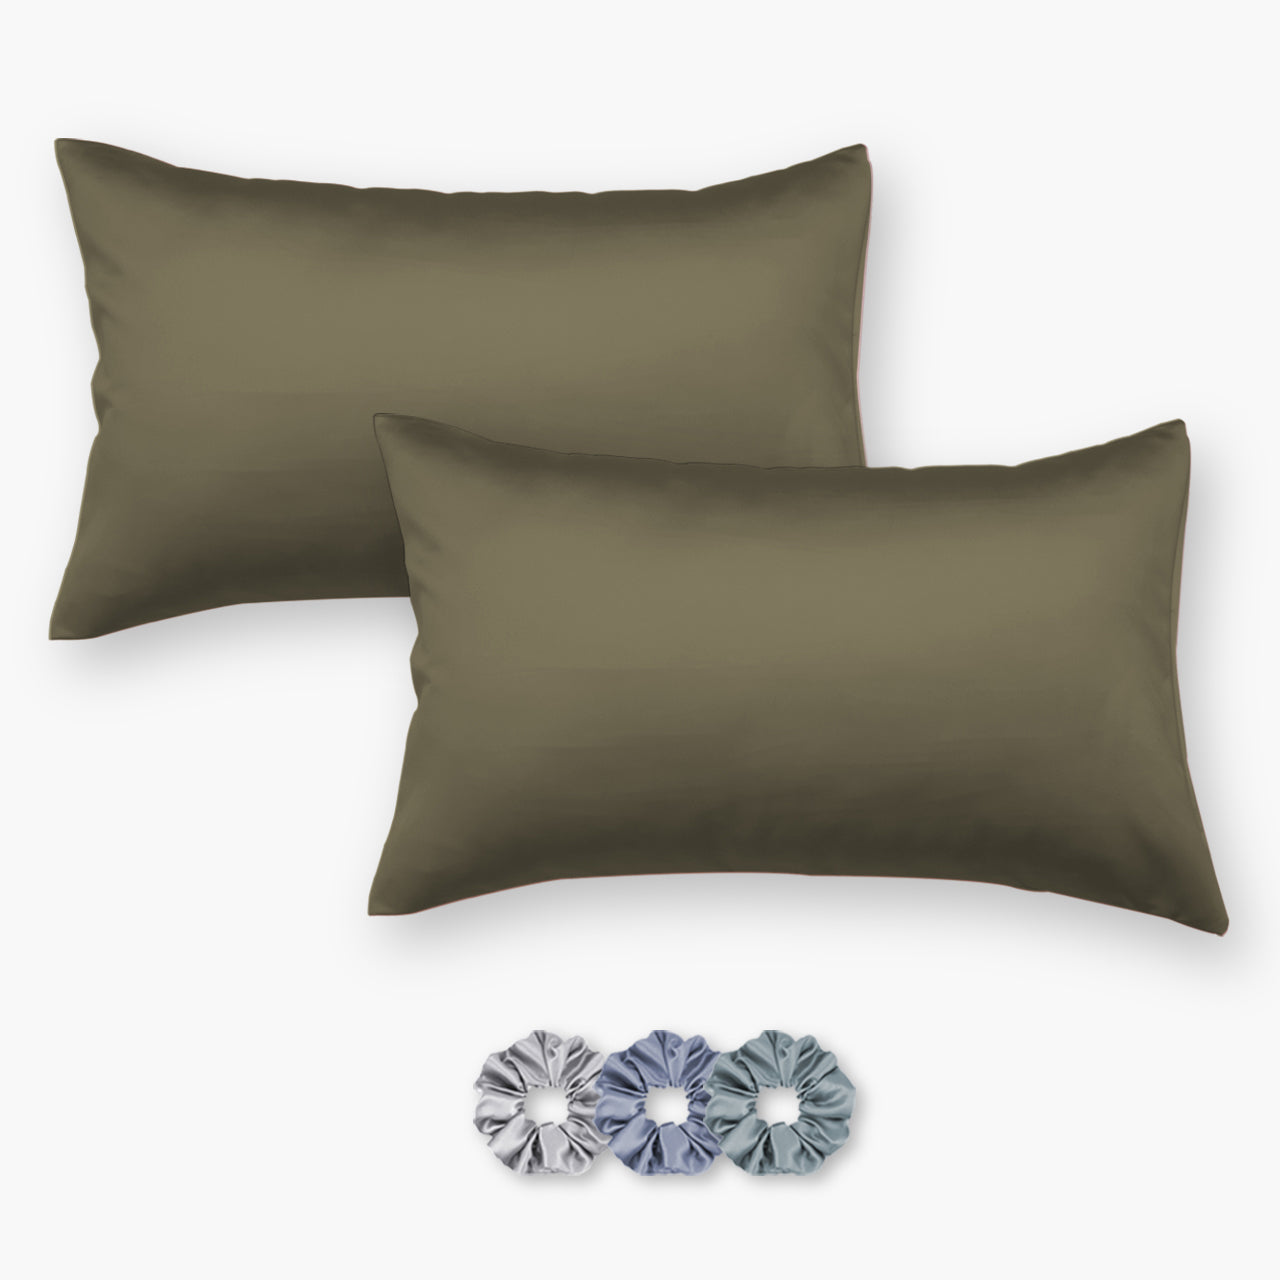 Olive Green Satin Pillow Covers - Set of 2 (With 3 free scrunchies)